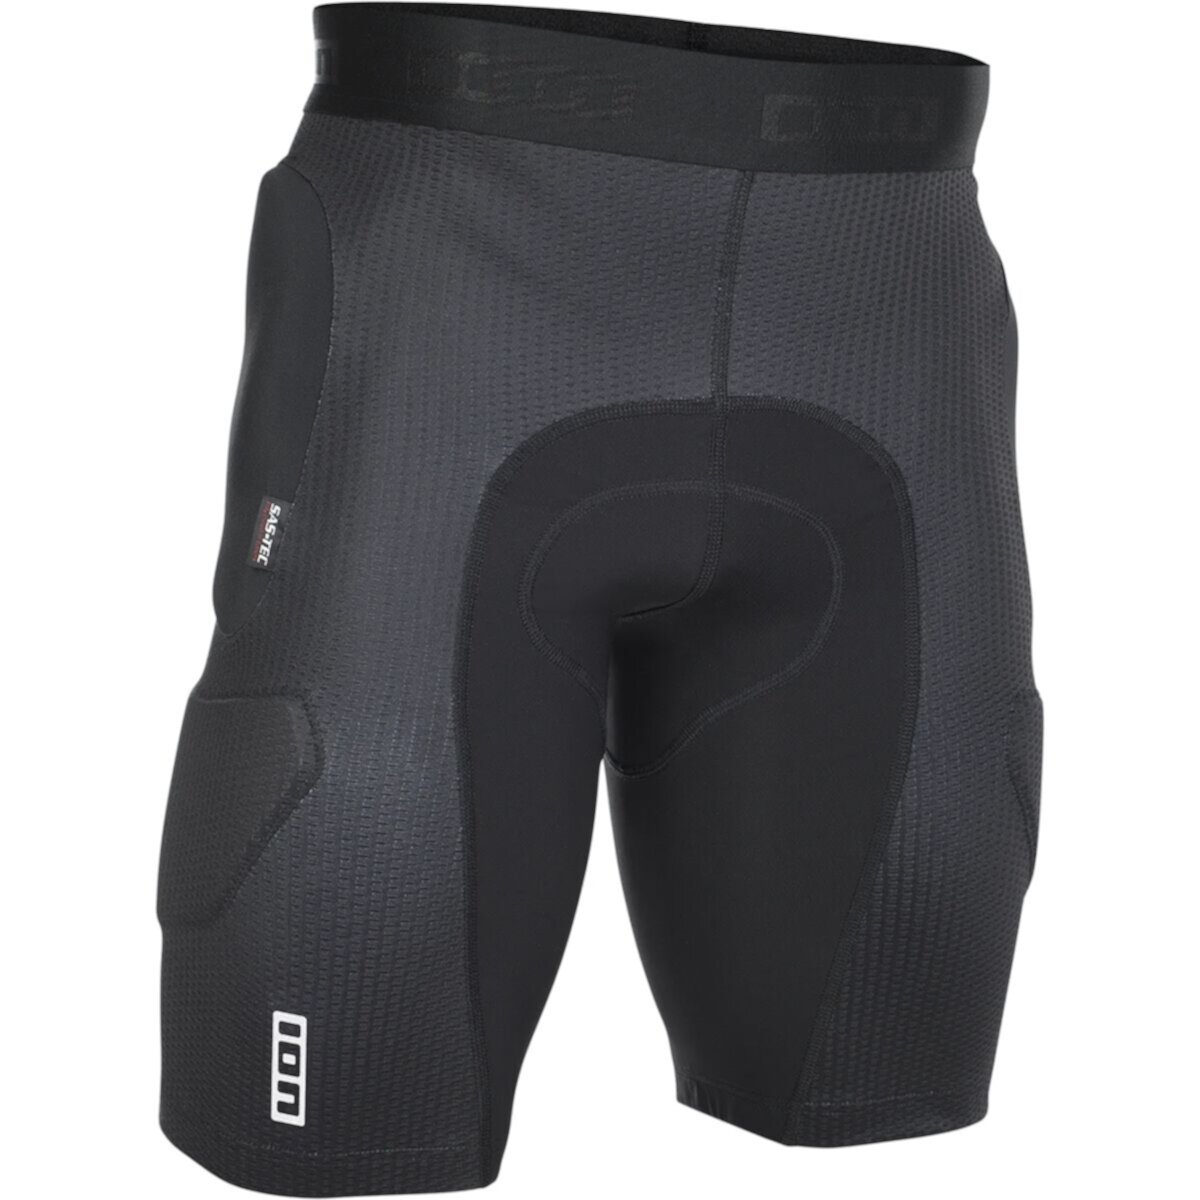 Protection Wear Plus Amp Short ION